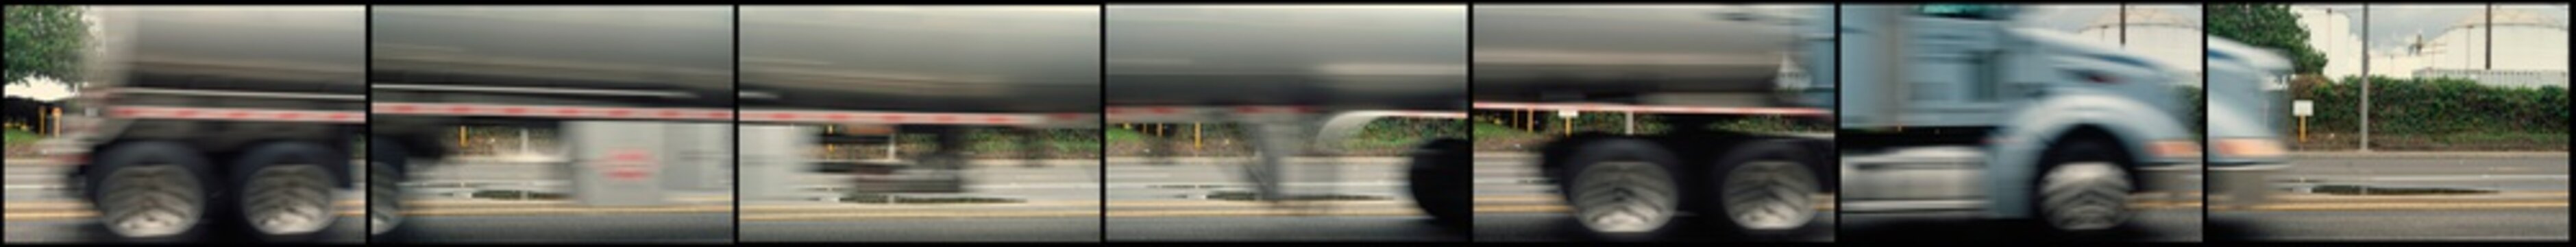 Seven blurred pictures of a truck assembled together as it quickly passes by.